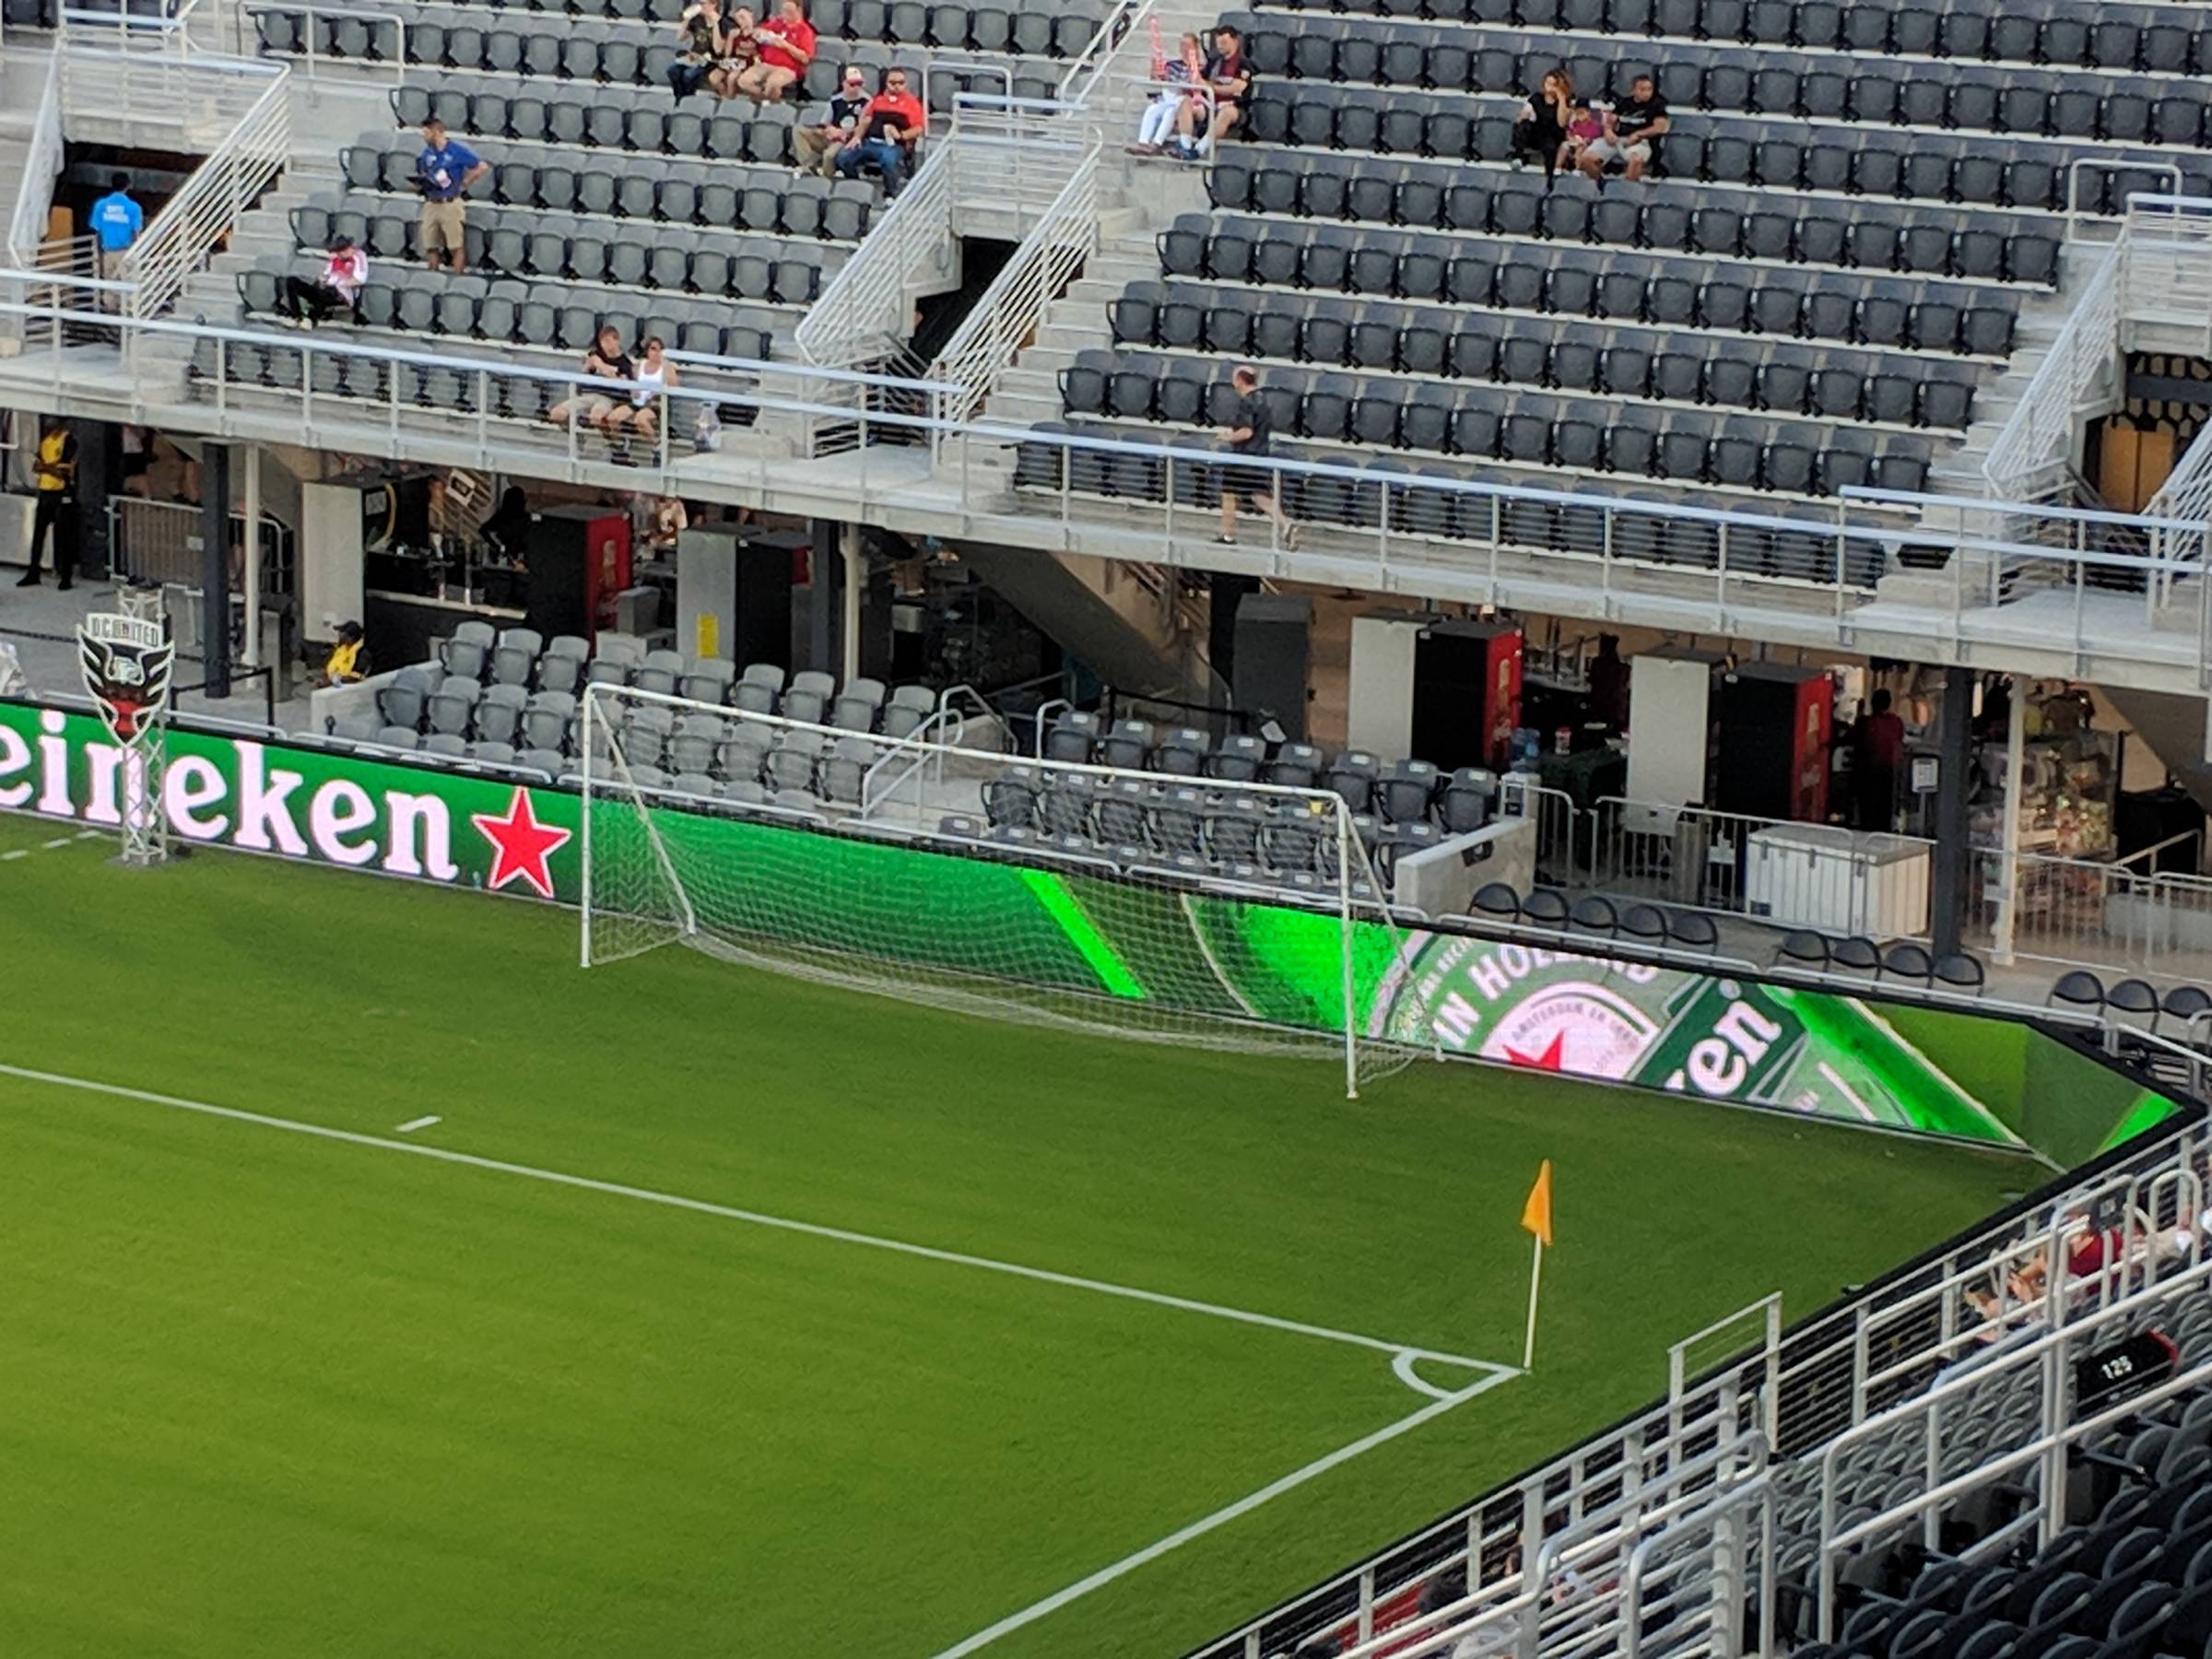 field seats for DC United game at Audi Field